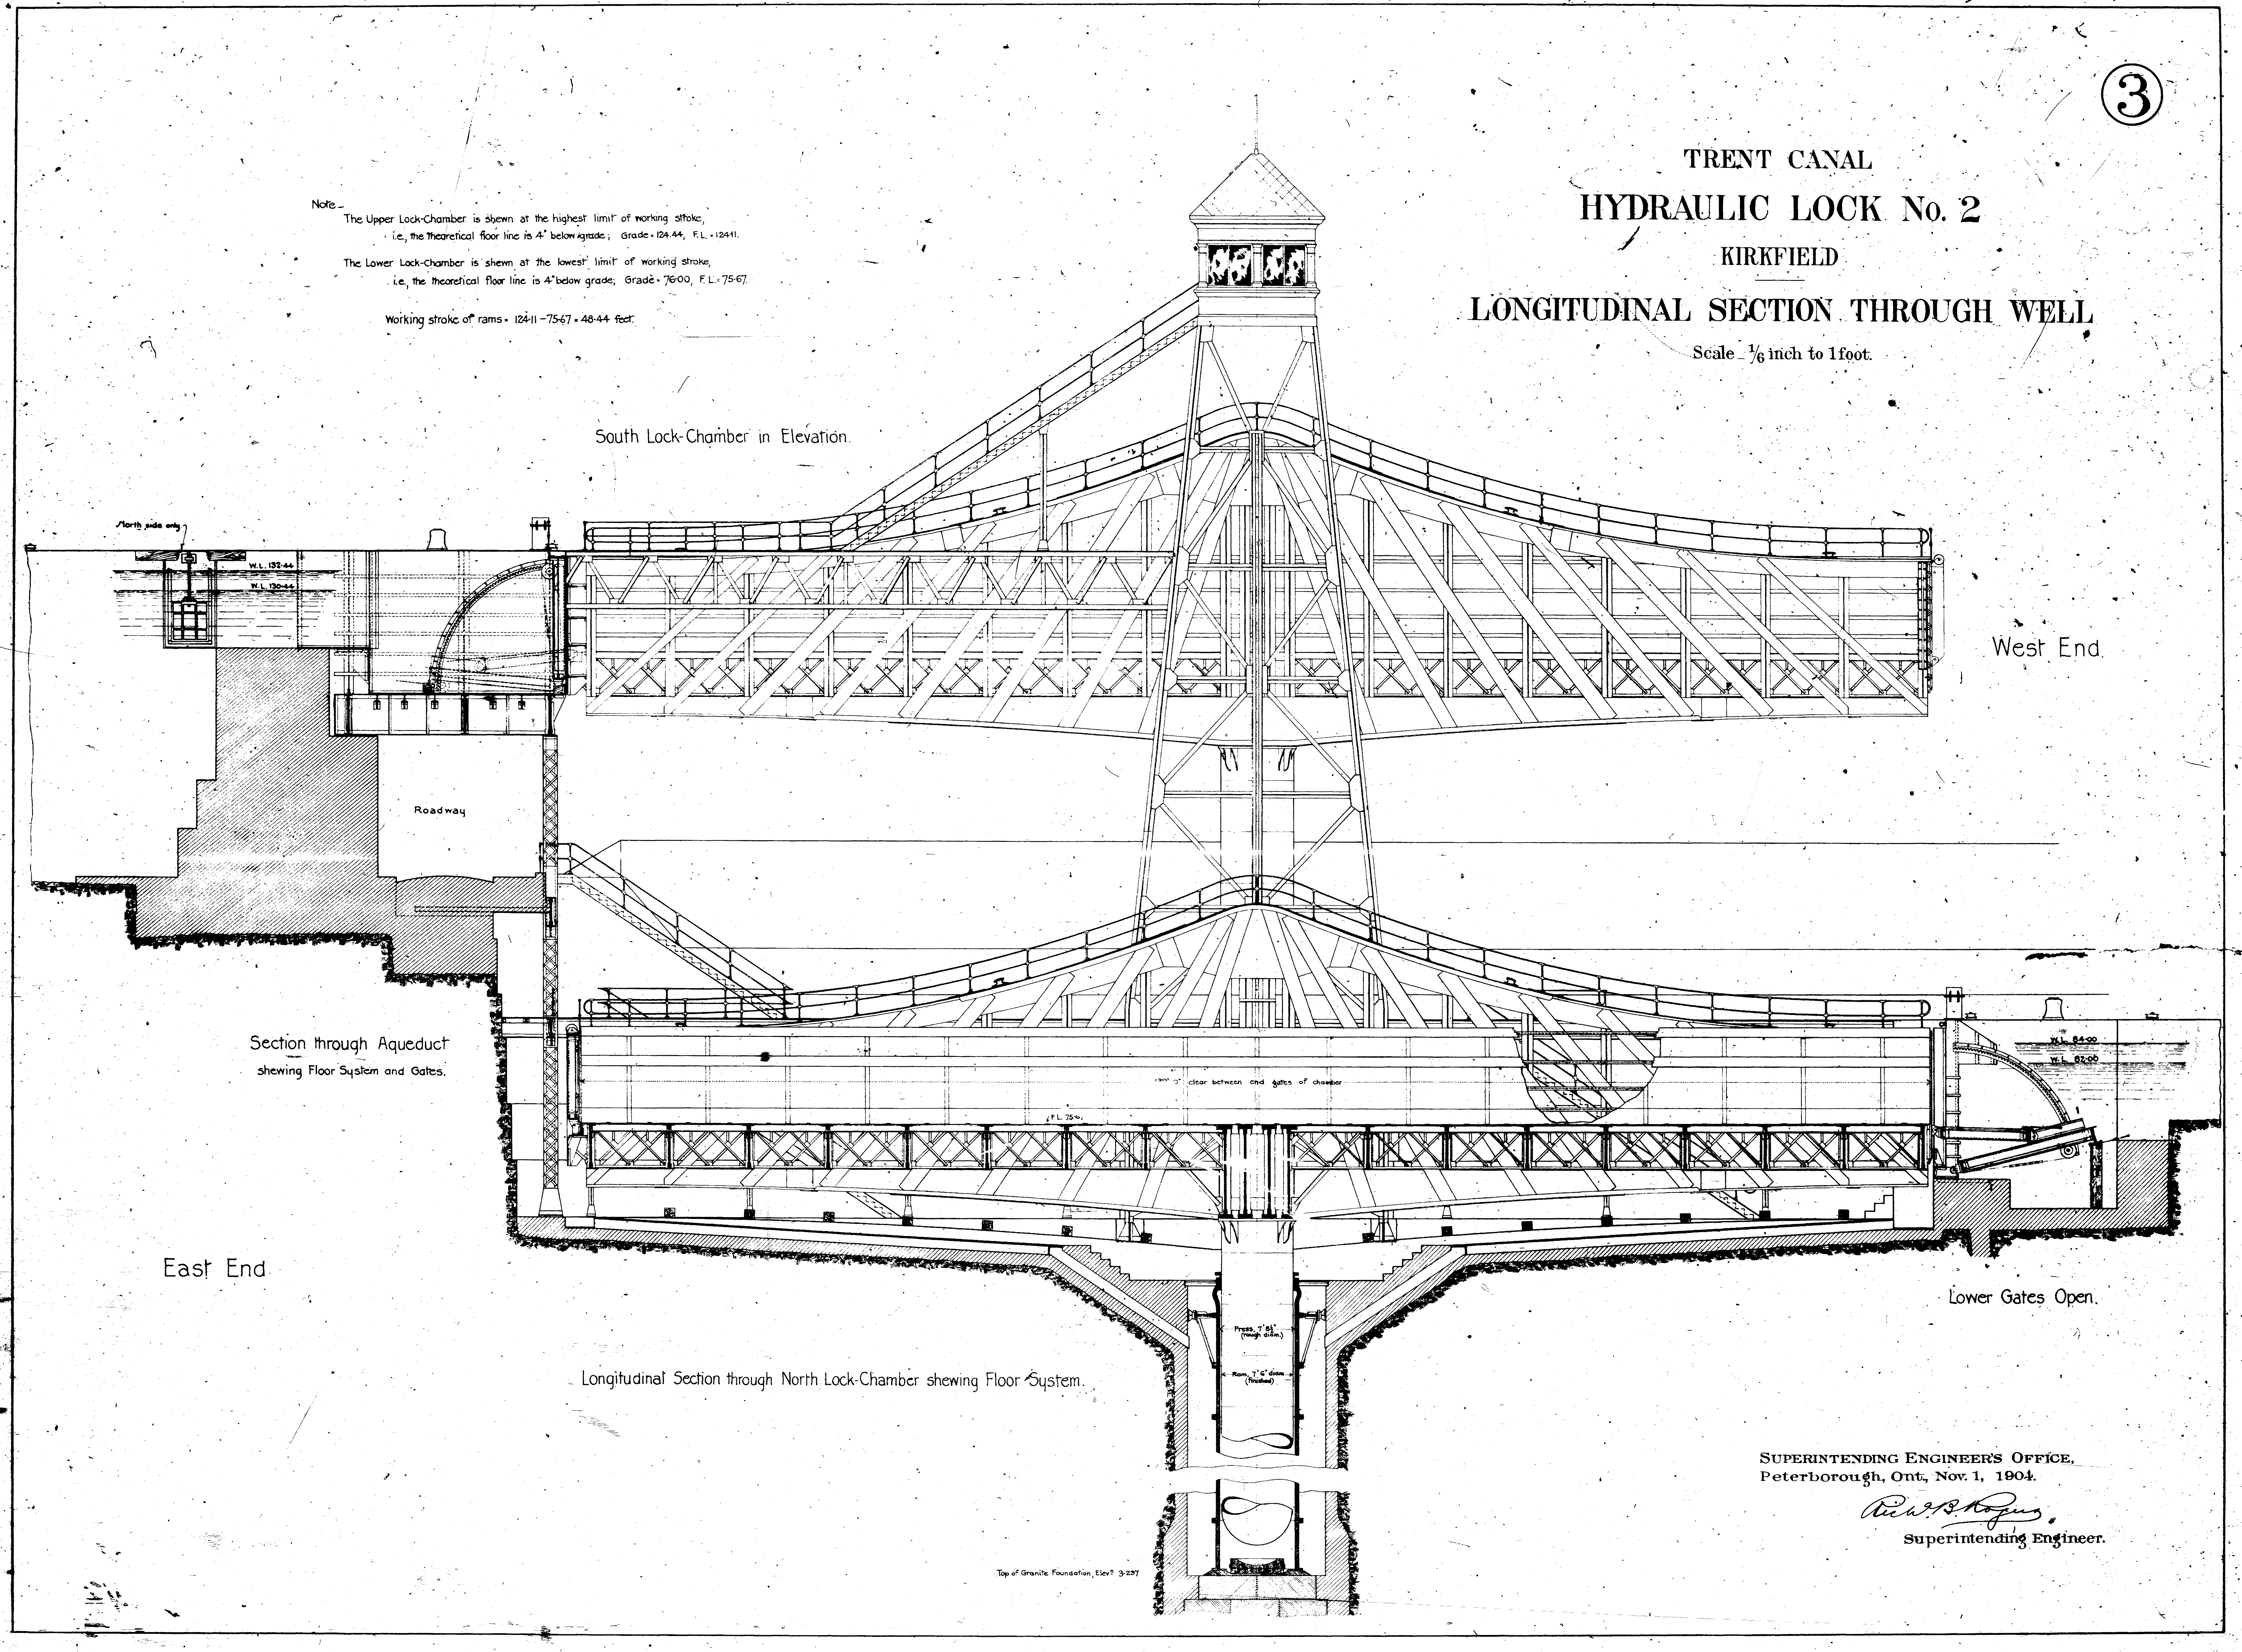 Black and white technical drawing of a cross-section through the lift lock and well.